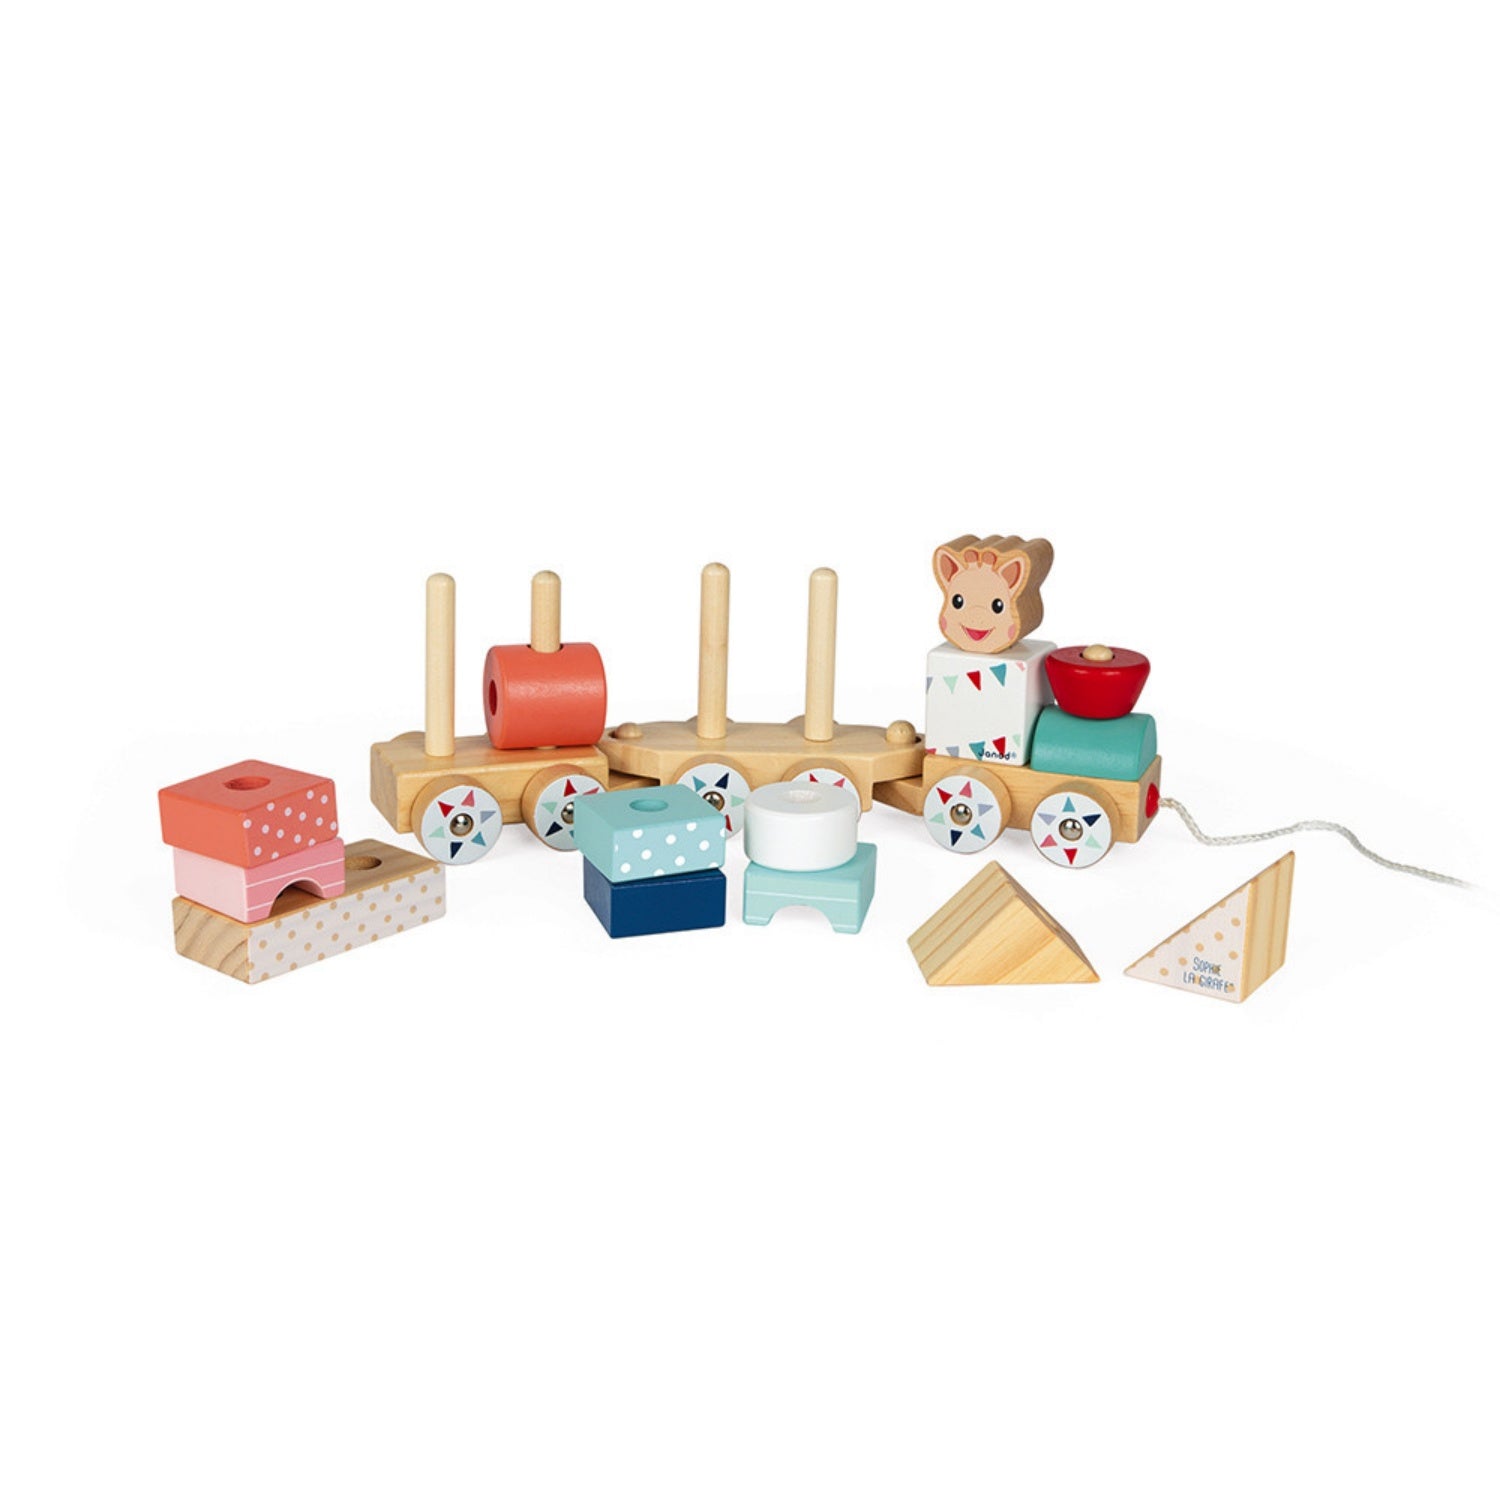 Janod Sophie la girafe Wooden Train | Wooden Toddler Activity Toy | Left Side With Partially Stacked Blocks | BeoVERDE.ie